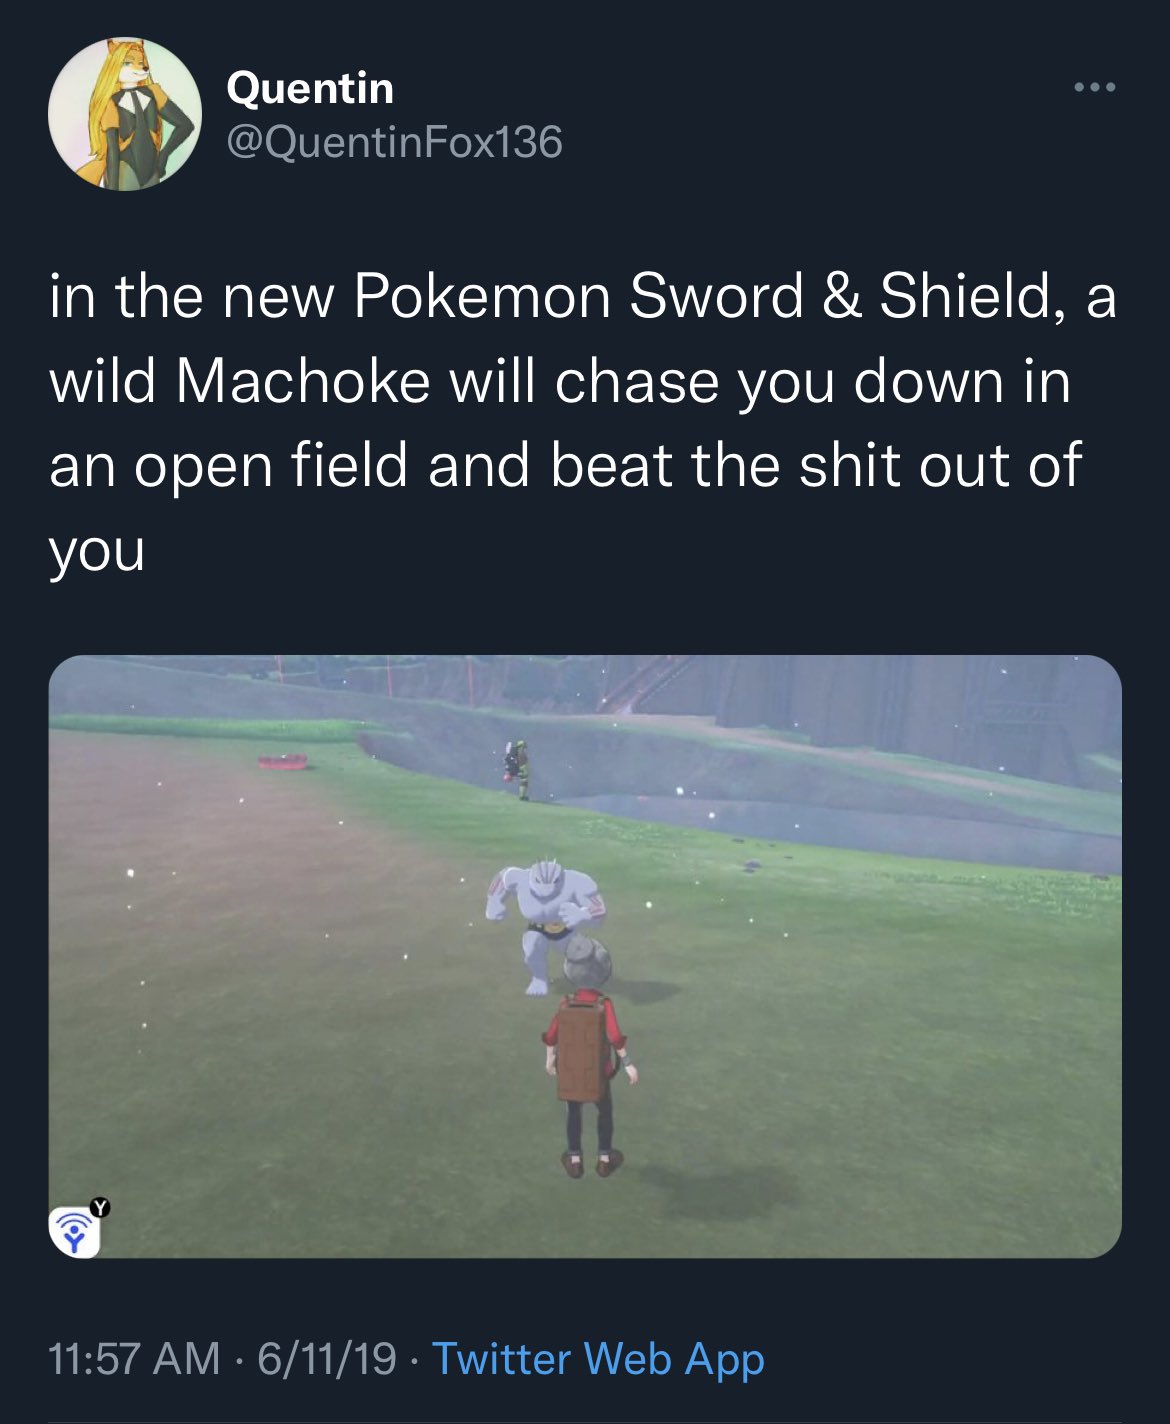 posts that aged well - Astrology - Quentin 6x in the new Pokemon Sword & Shield, a wild Machoke will chase you down in an open field and beat the shit out of you ... 61119 Twitter Web App